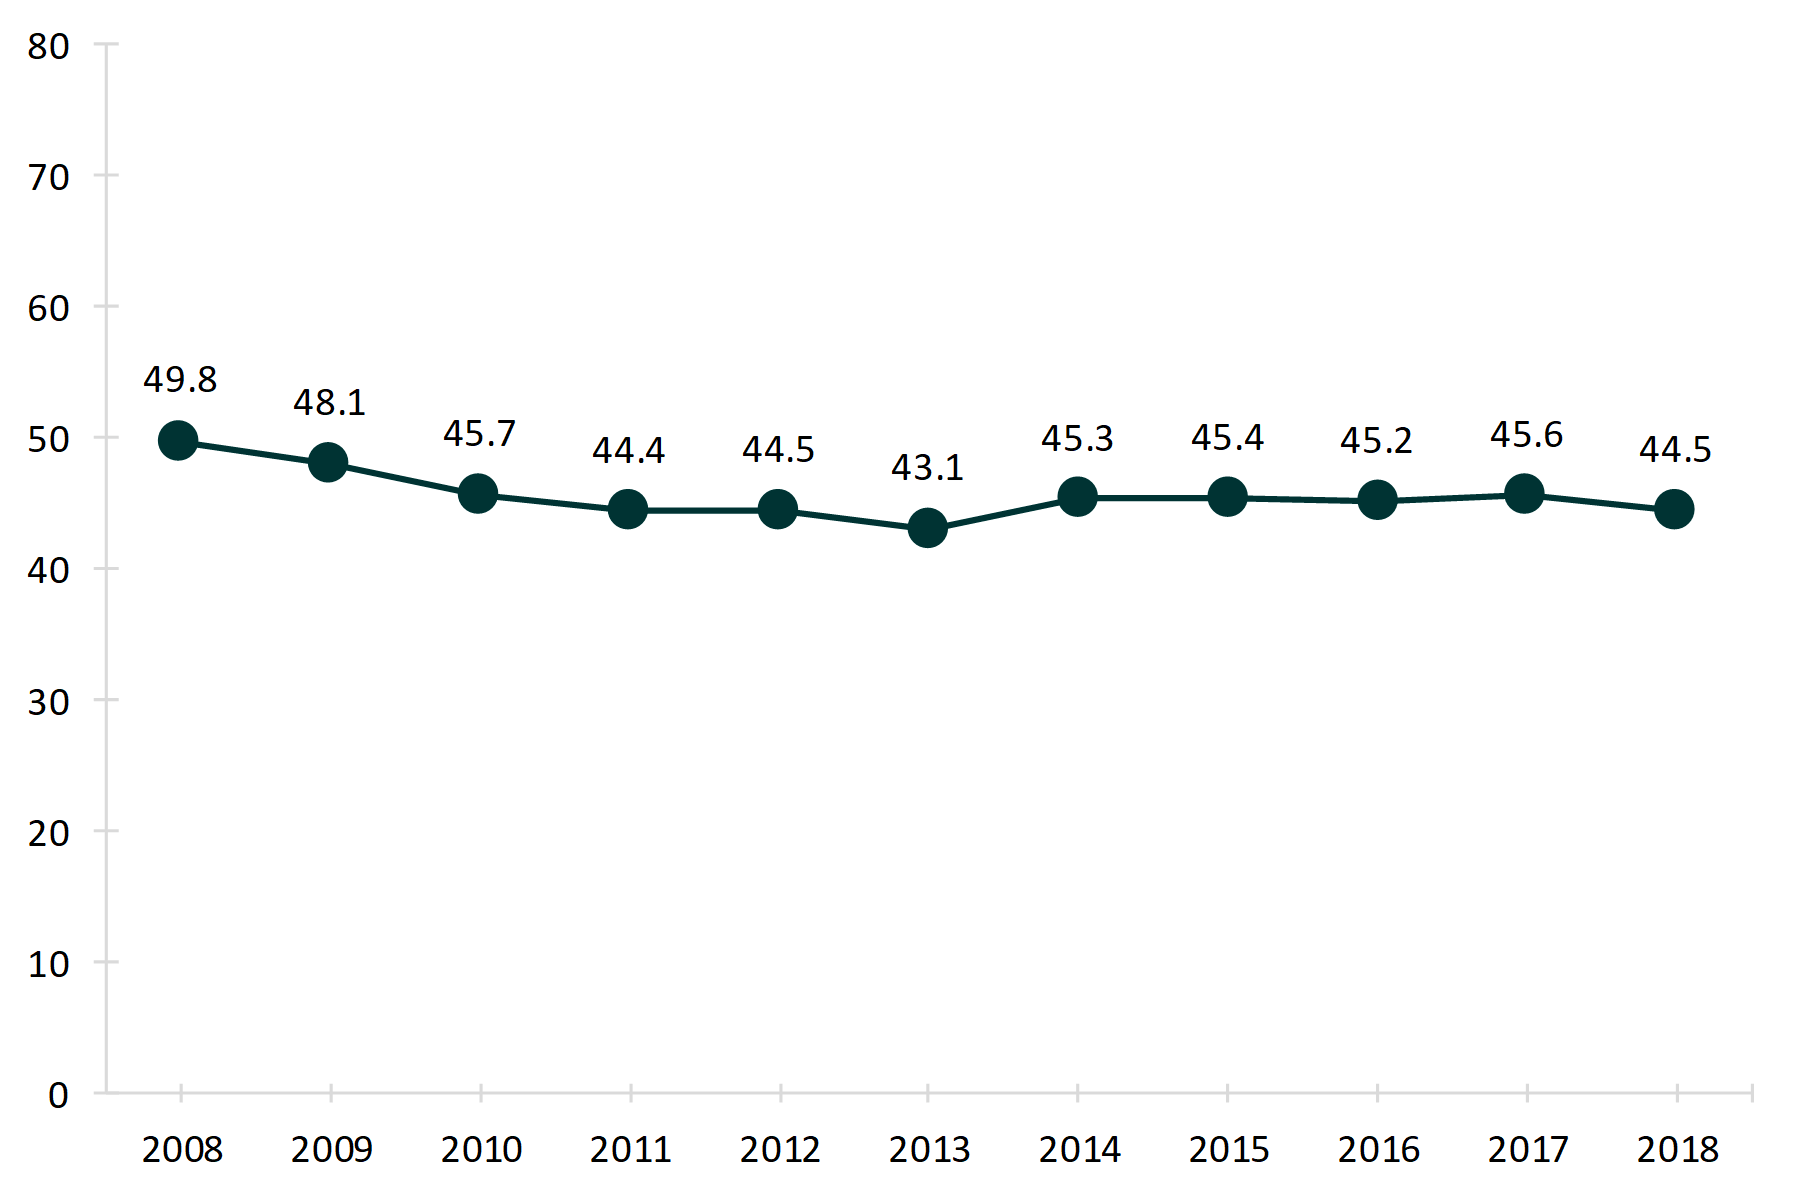 line chart showing data Figure 1. First Marriage Rate for Women Aged 18 and Older, 2008-2018